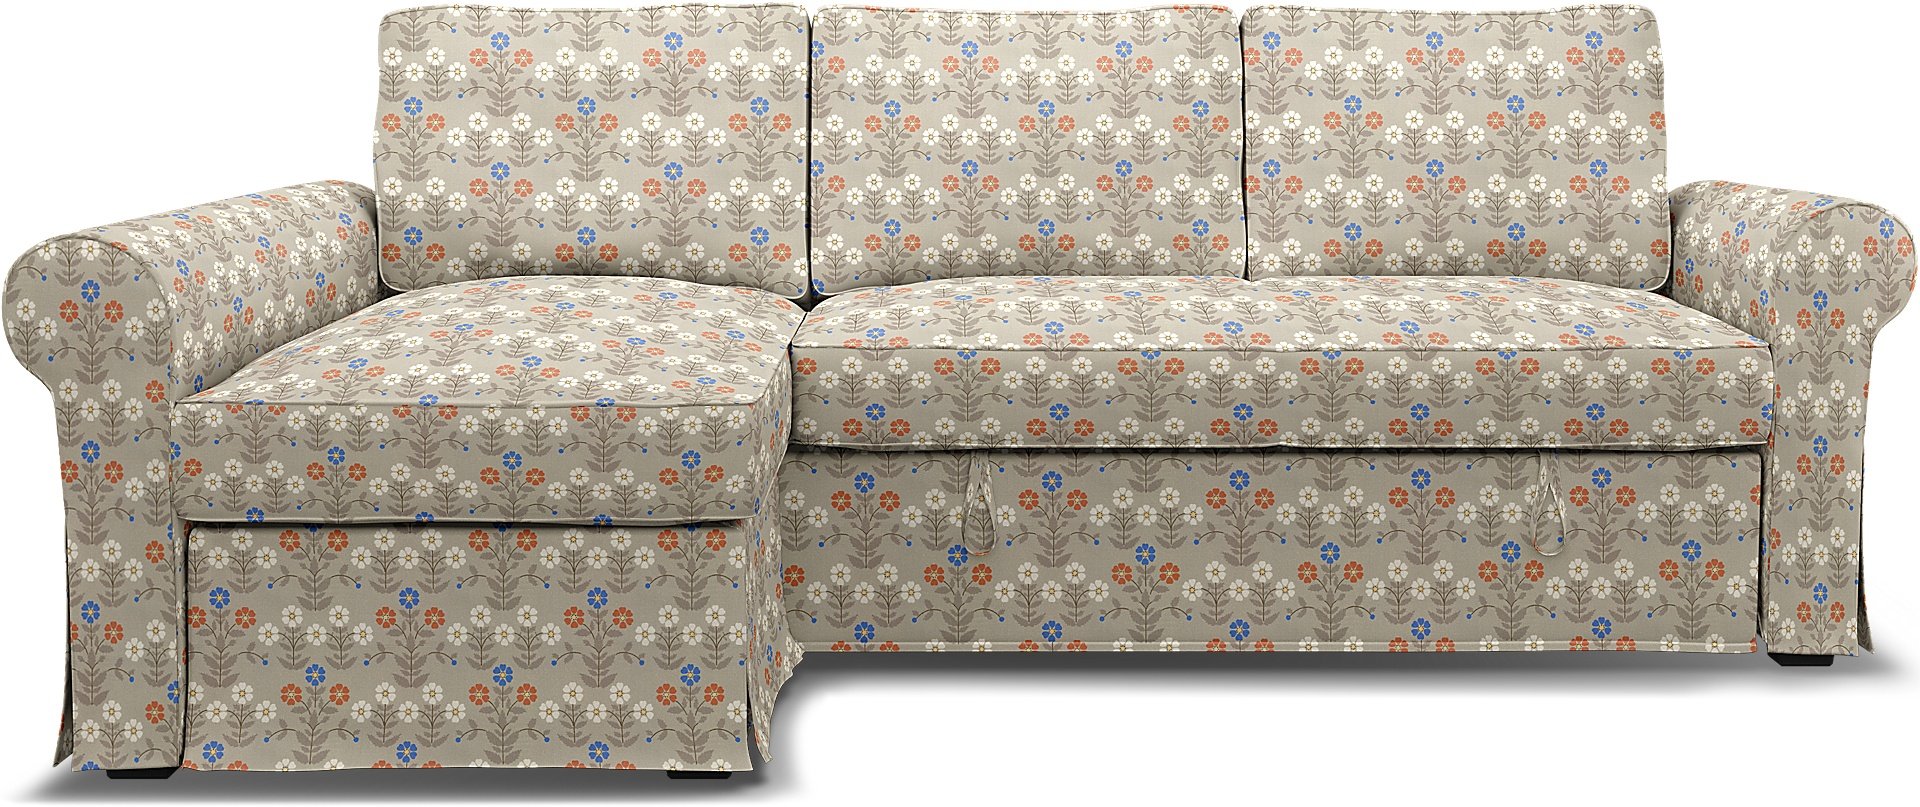 IKEA - Backabro Sofabed with Chaise Cover, Sippor Blue/Orange, BEMZ x BORASTAPETER COLLECTION - Bemz